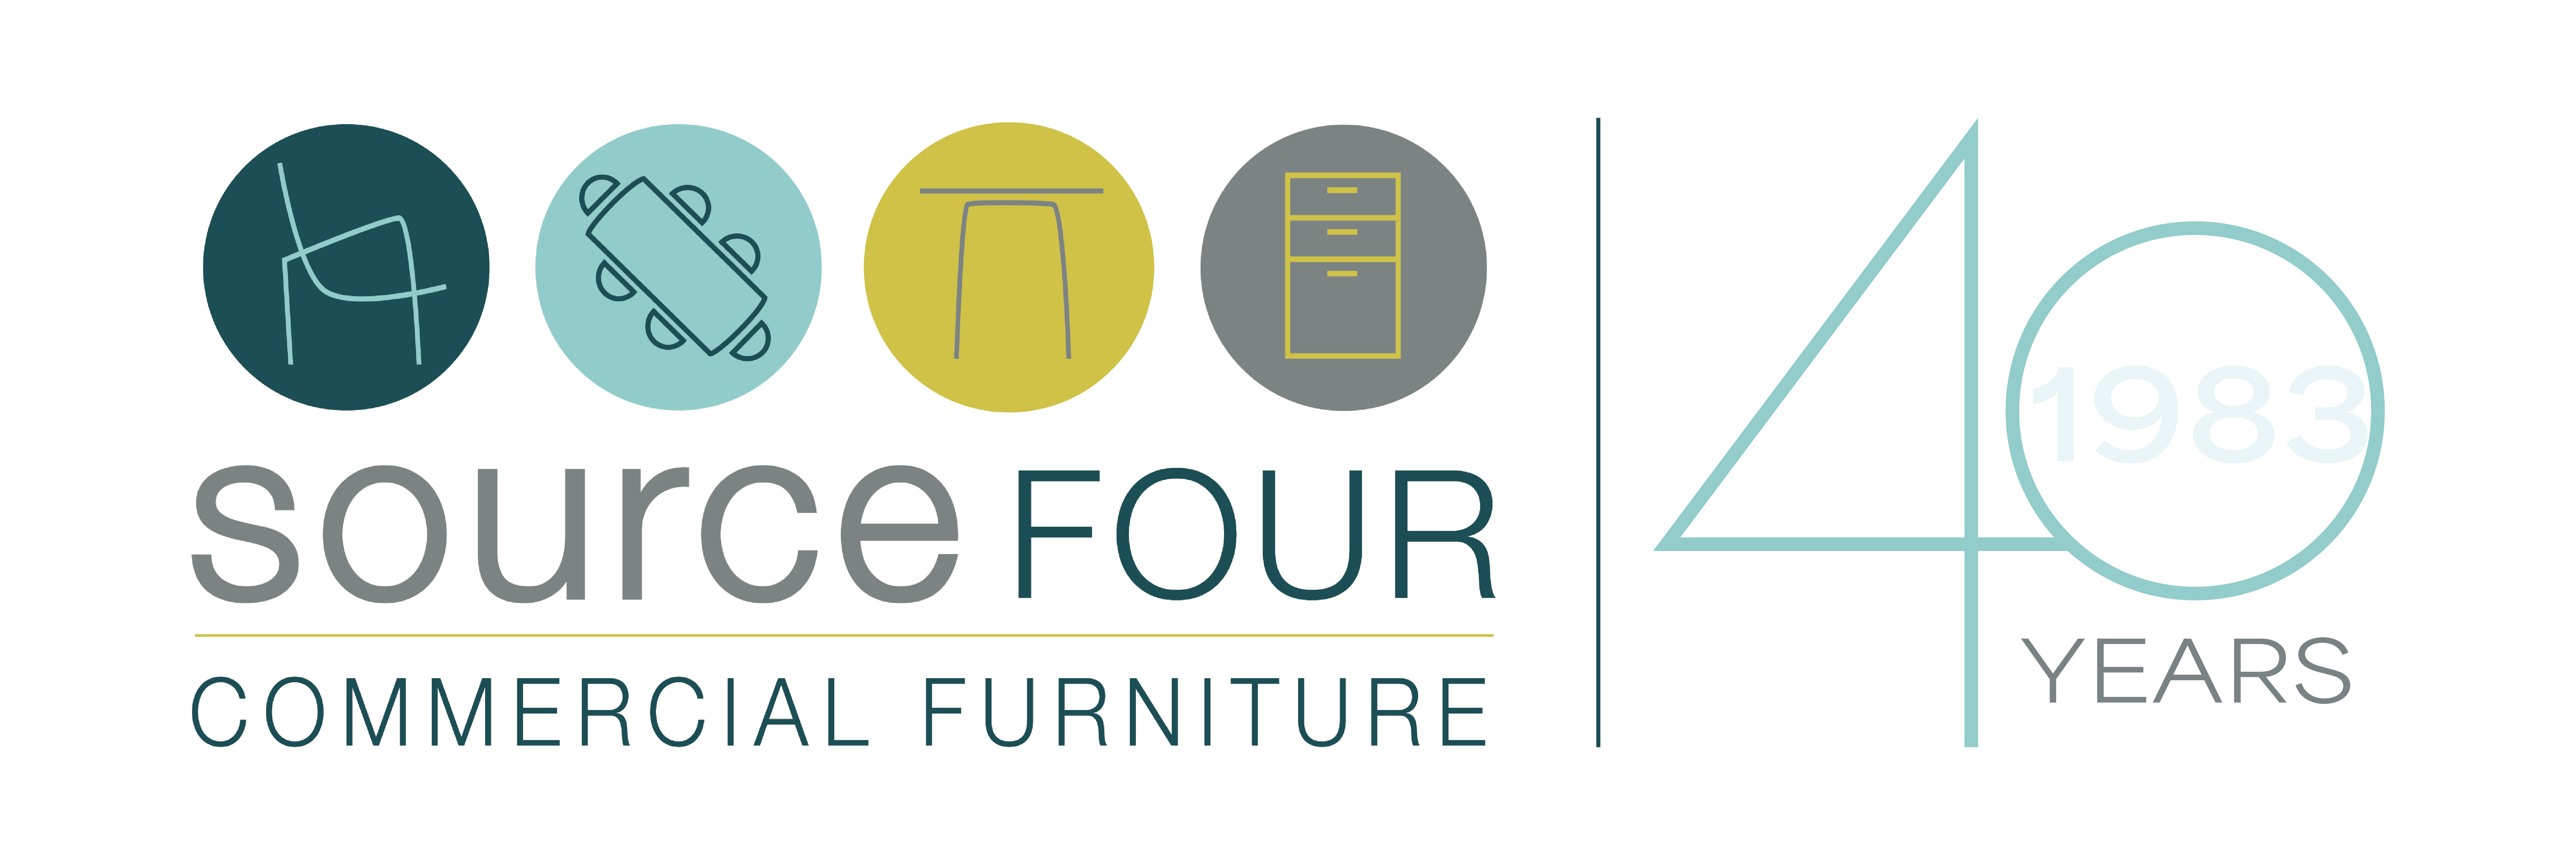 Modern Commercial Furniture Company